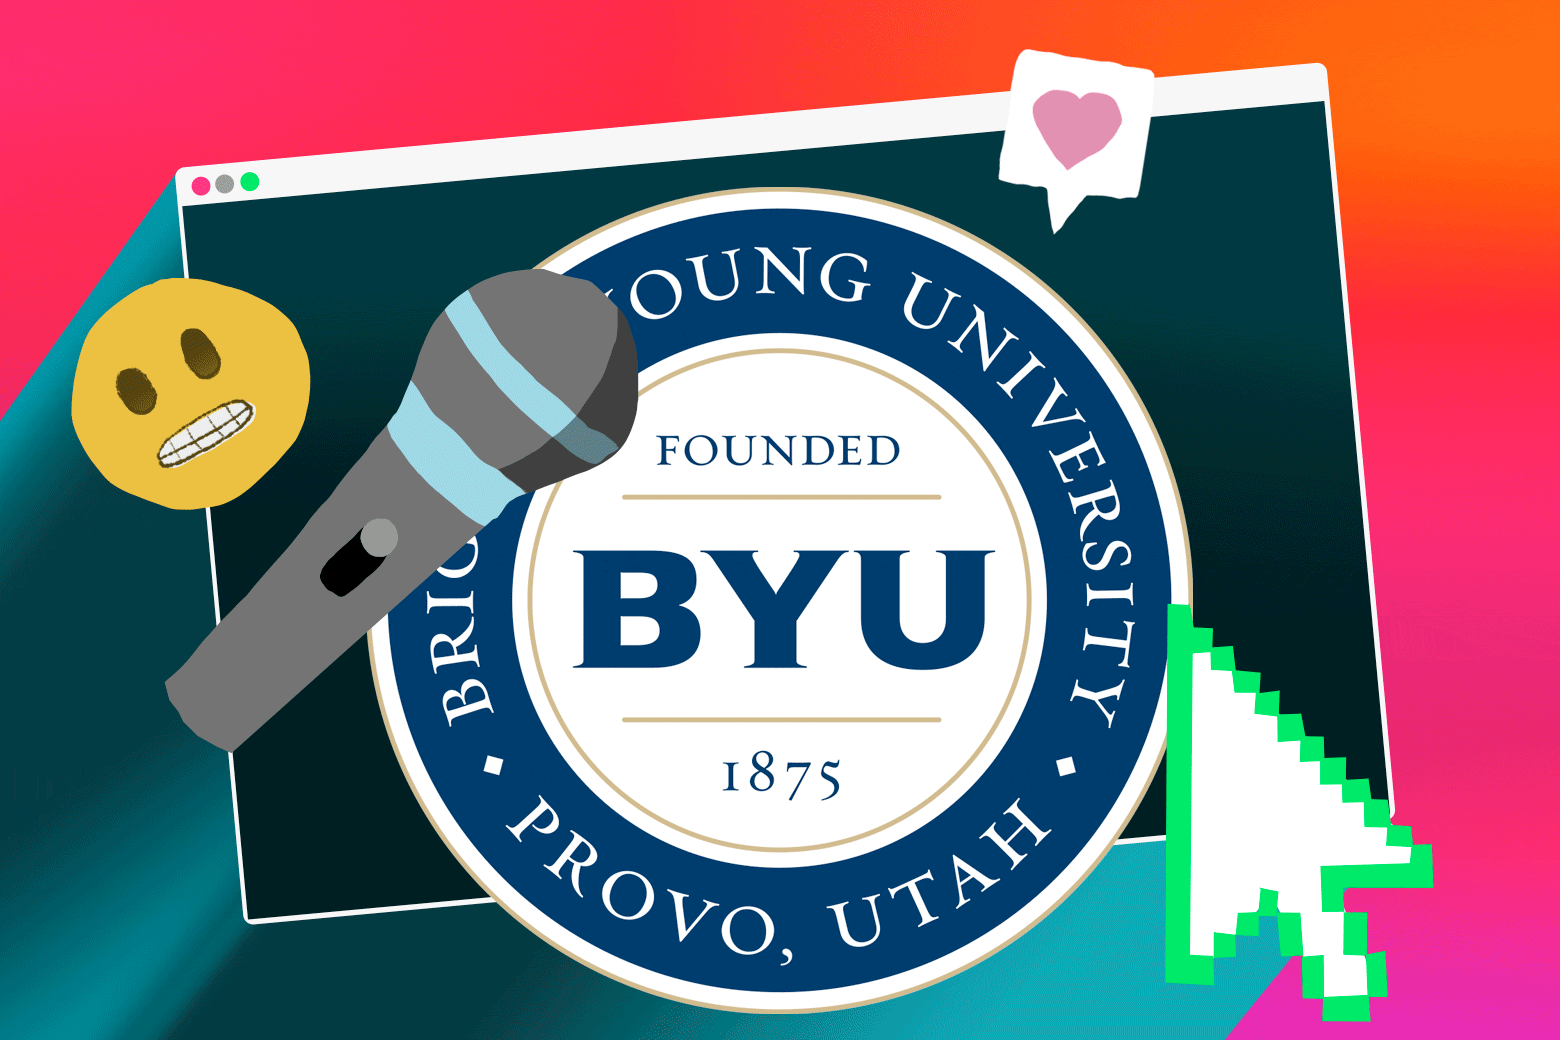 The Brigham Young University logo surrounded by a microphone.